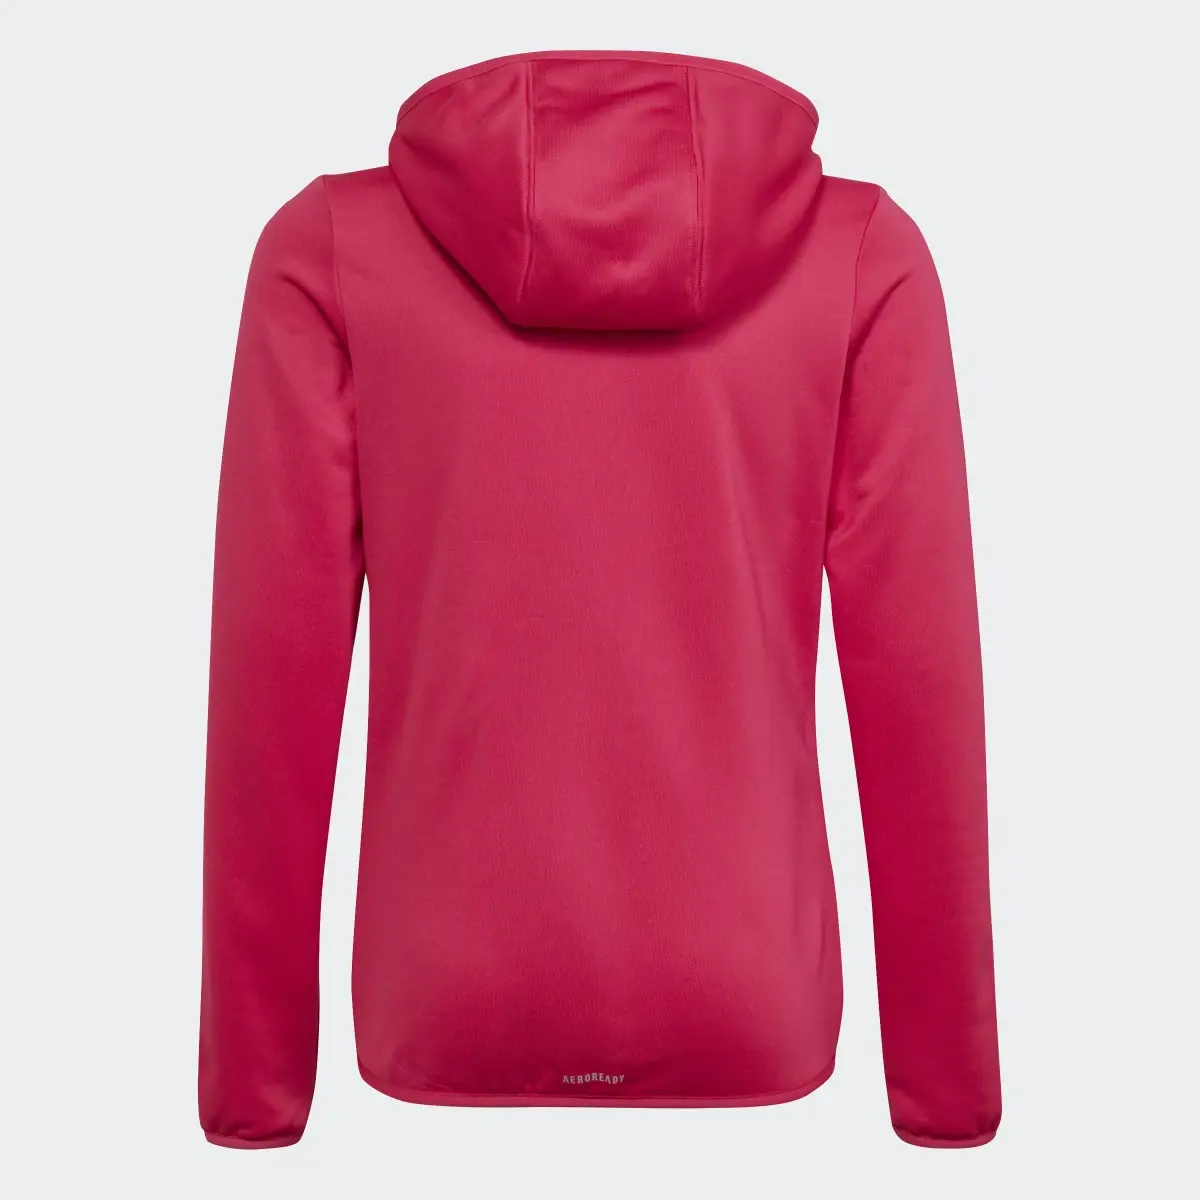 Adidas Designed To Move 3-Stripes Full-Zip Hoodie. 2